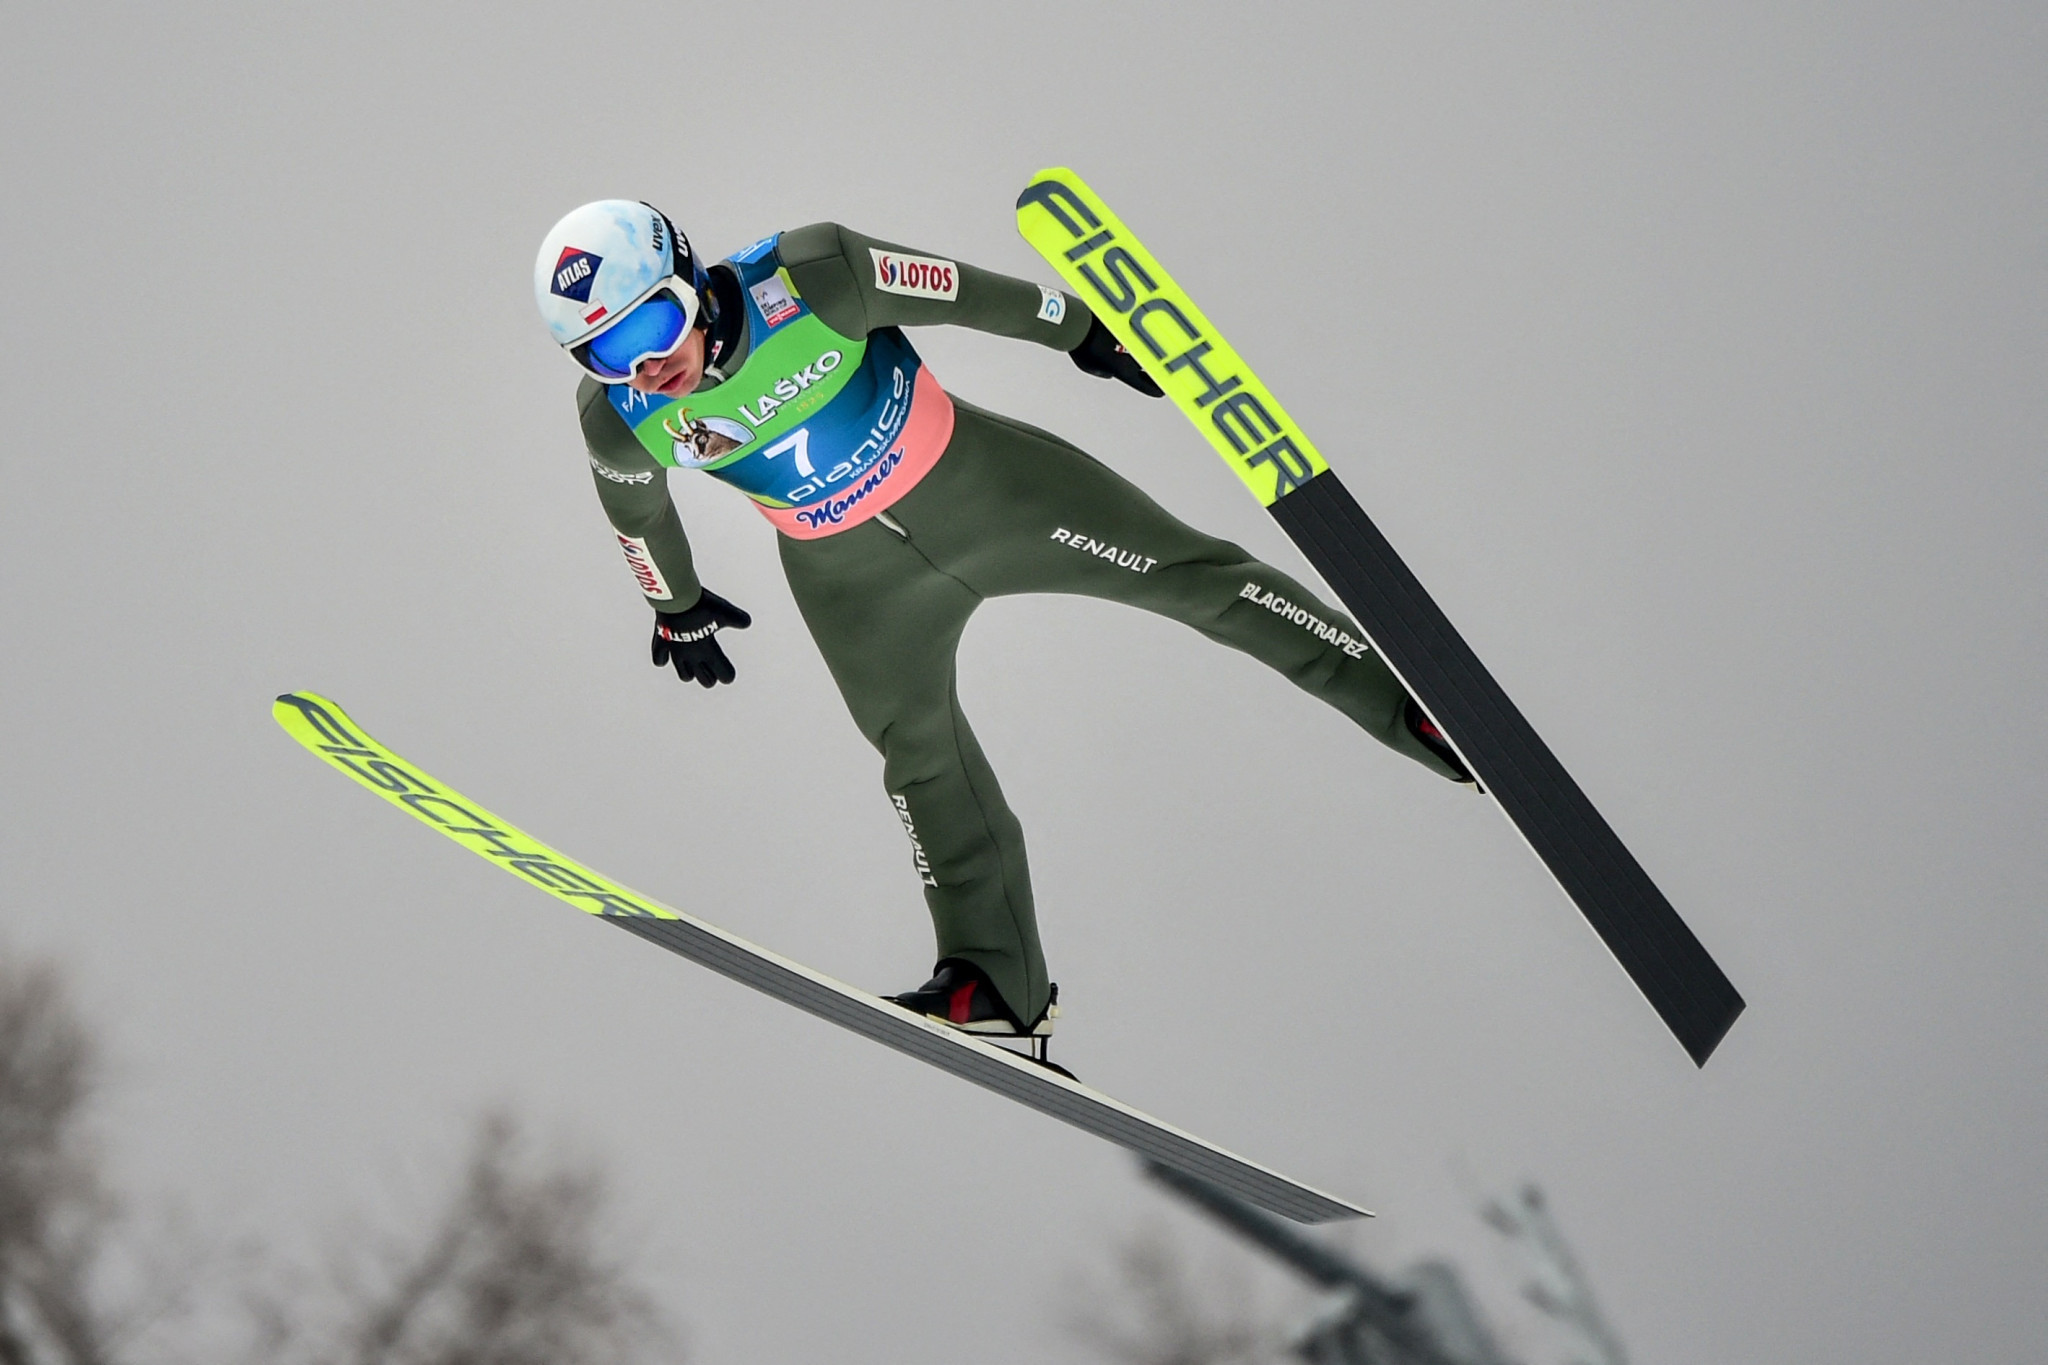 Planica staged the final legs of the 2020-2021 Ski Jumping World Cup season ©Getty Images